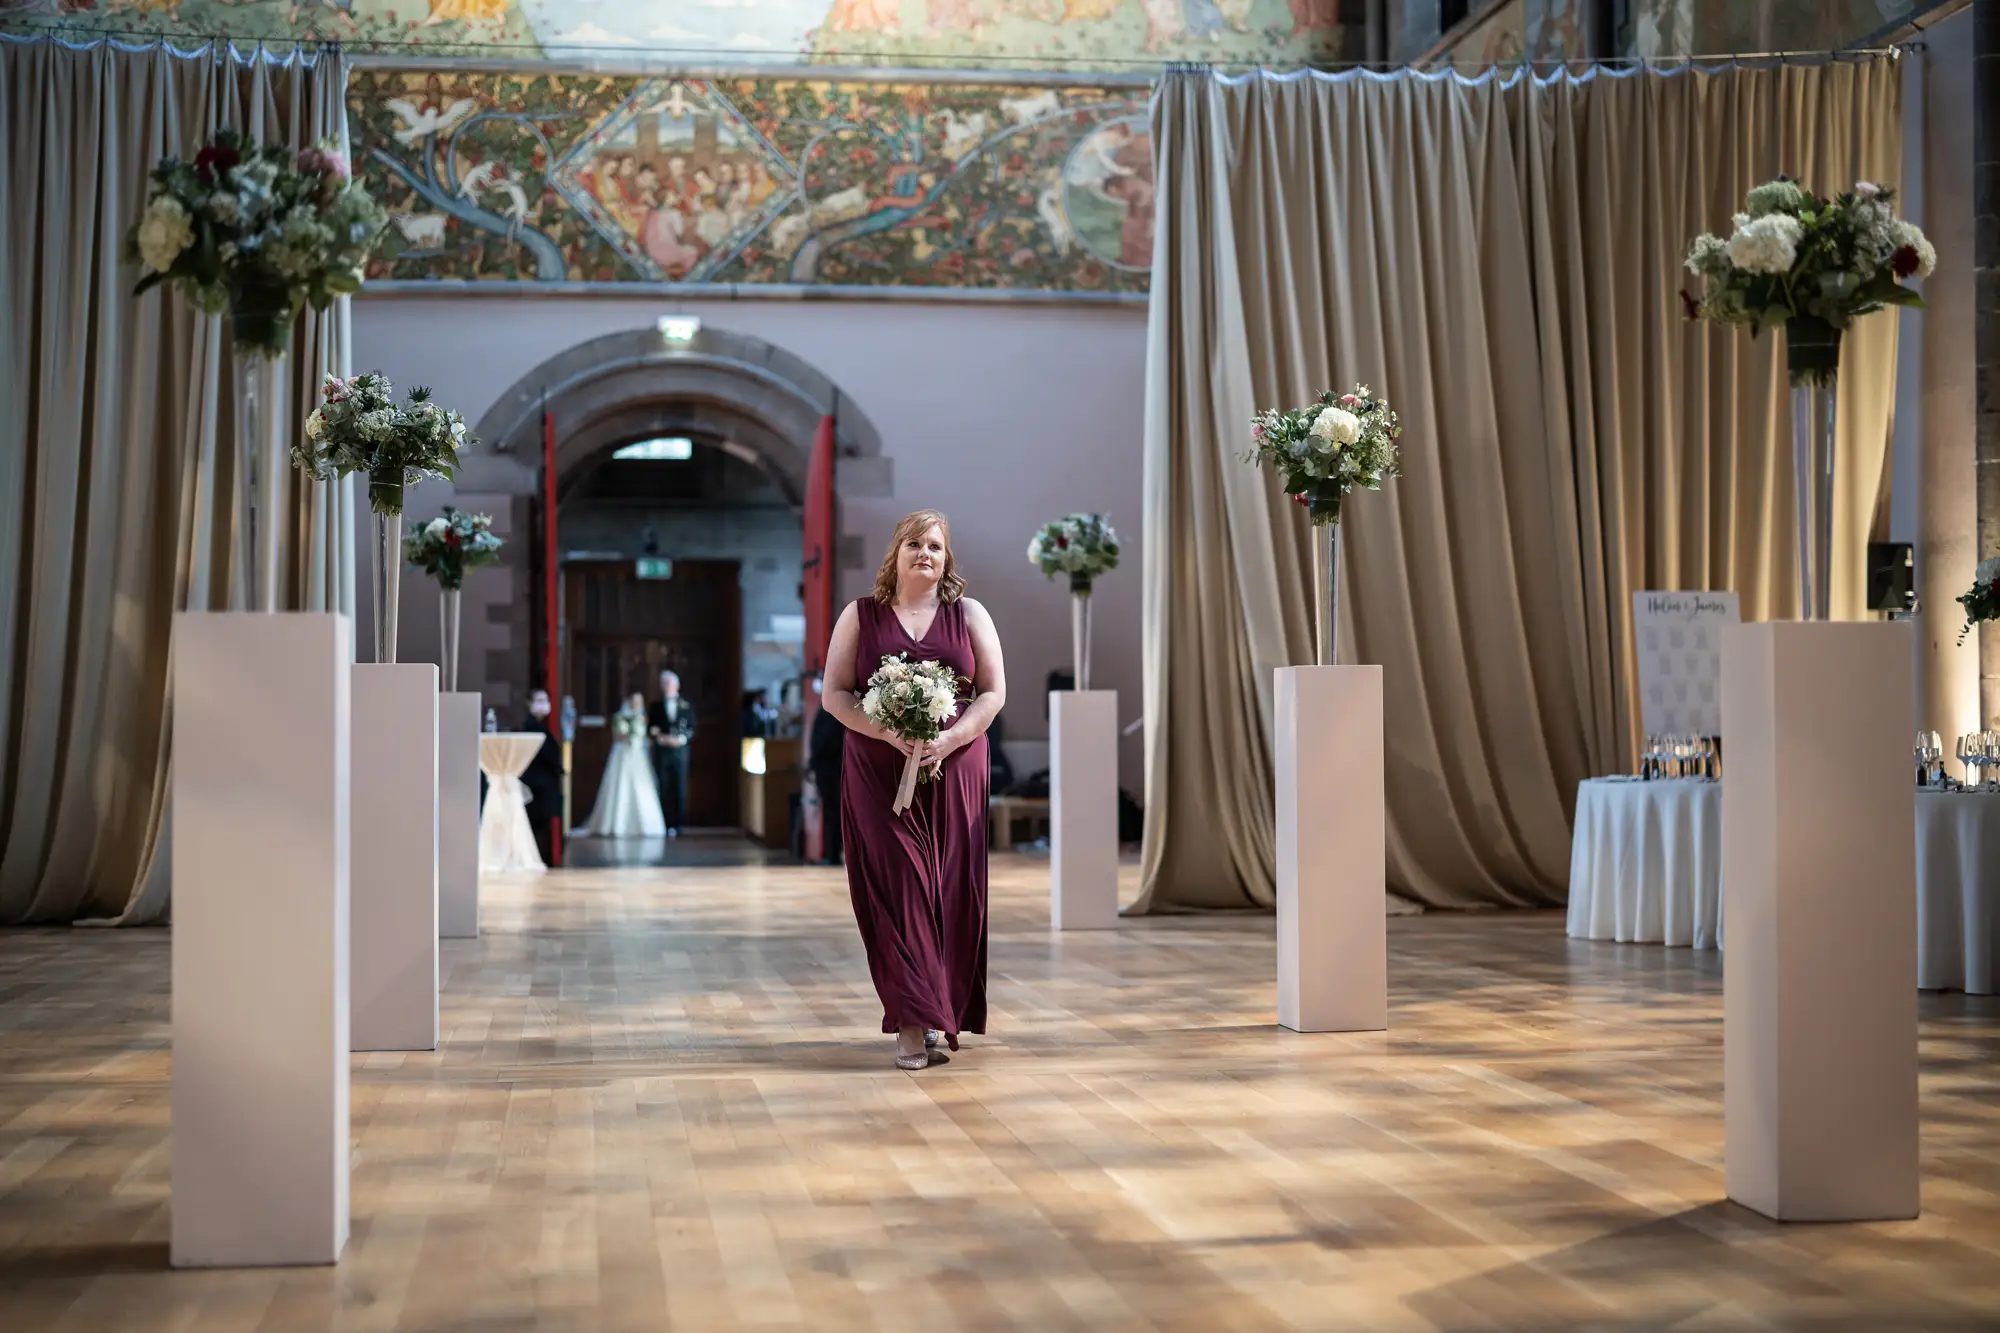 A woman in a burgundy dress holding a bouquet walks between rows of floral arrangements in an ornately decorated hall.